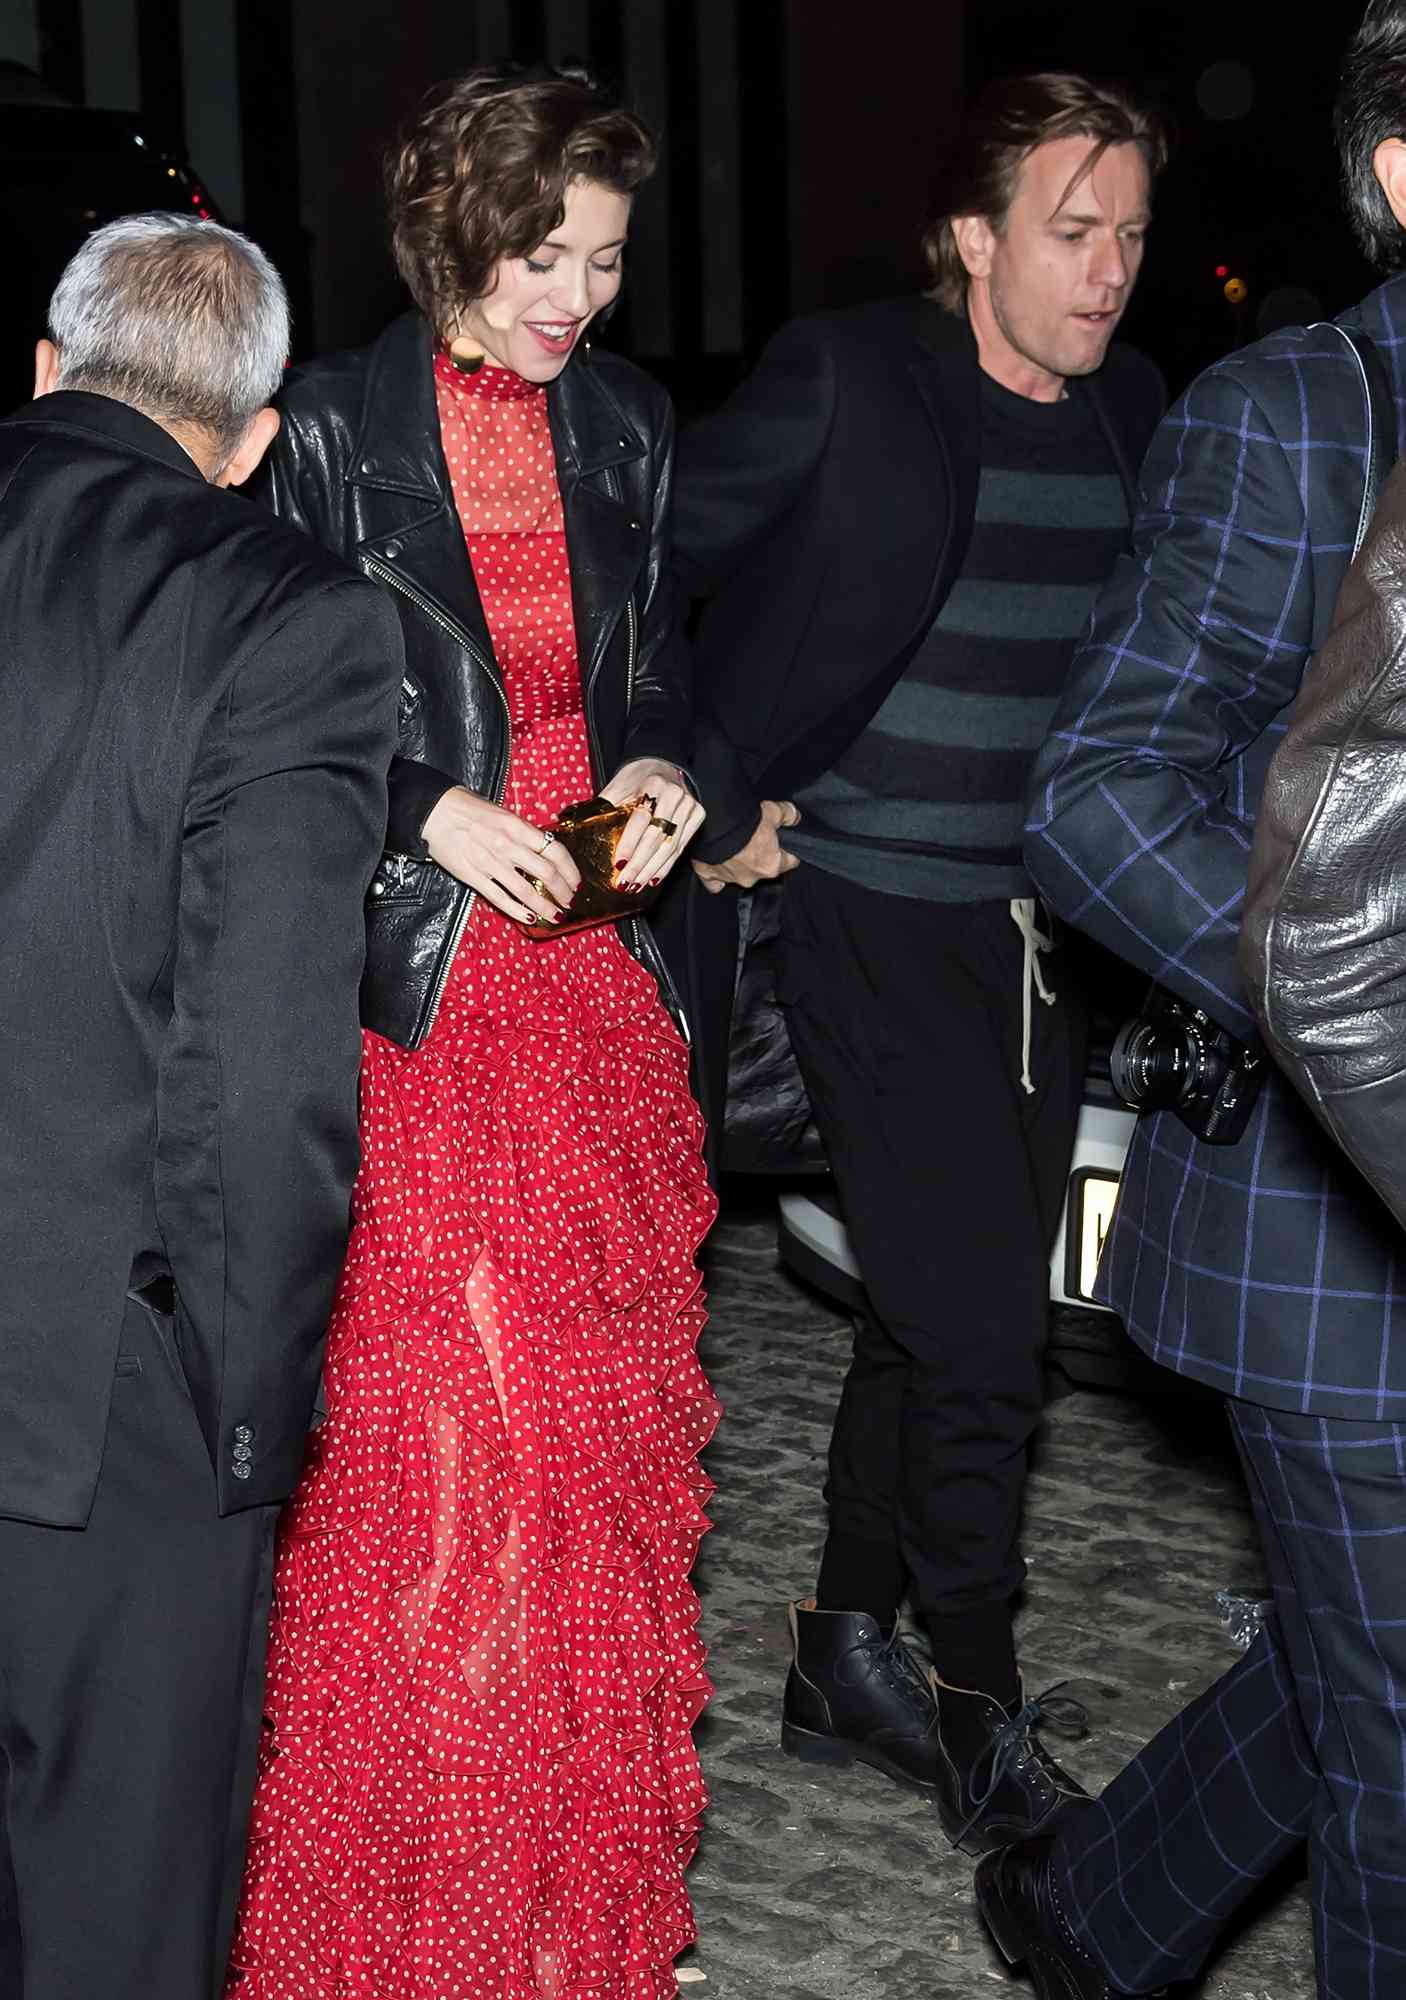 Mary Elizabeth Winstead and Ewan McGregor arriving to the 2018 Tribeca Film Festival After-Party For All About Nina, Hosted By Don Julio At Catch Roof on April 22, 2018 in New York City